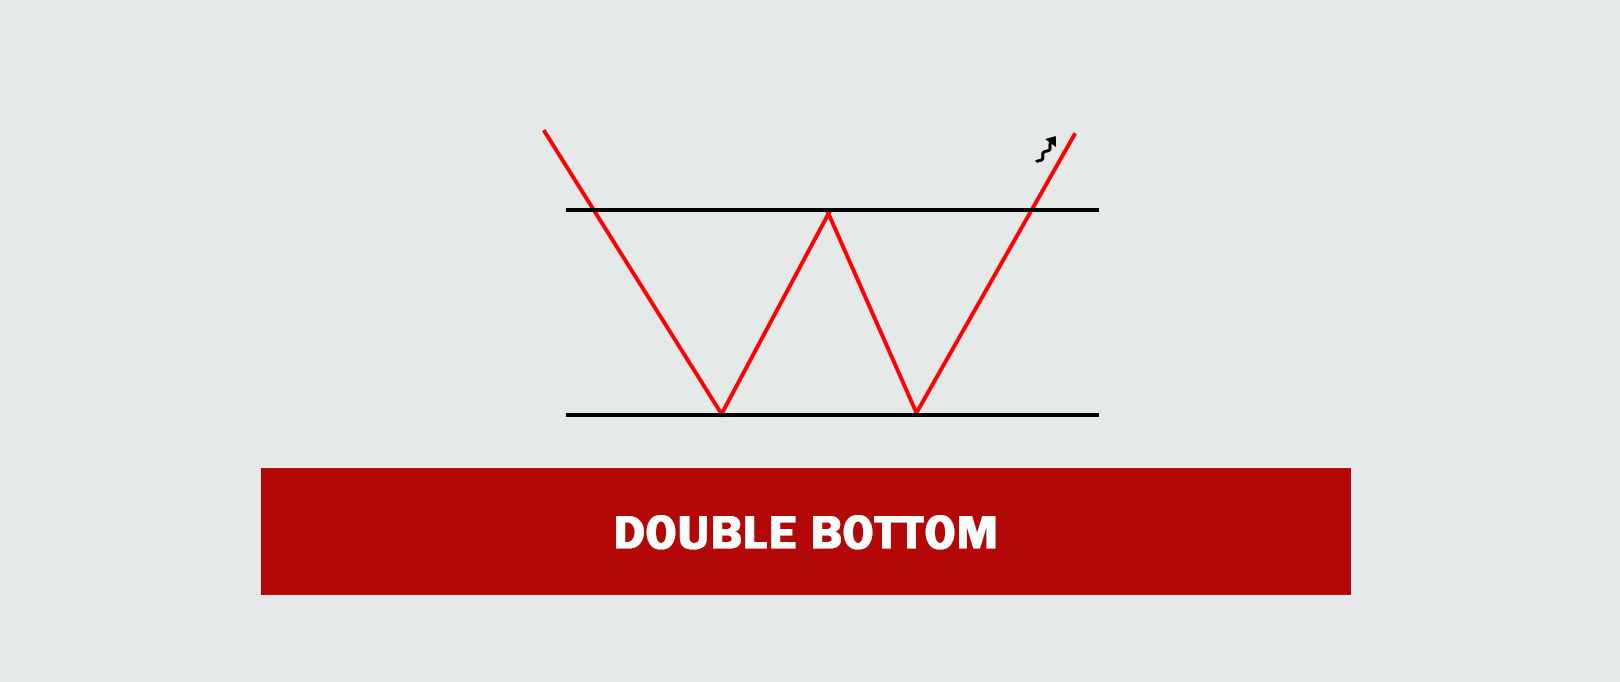 The double bottom pattern is a bullish reversal pattern that develops after a downtrend